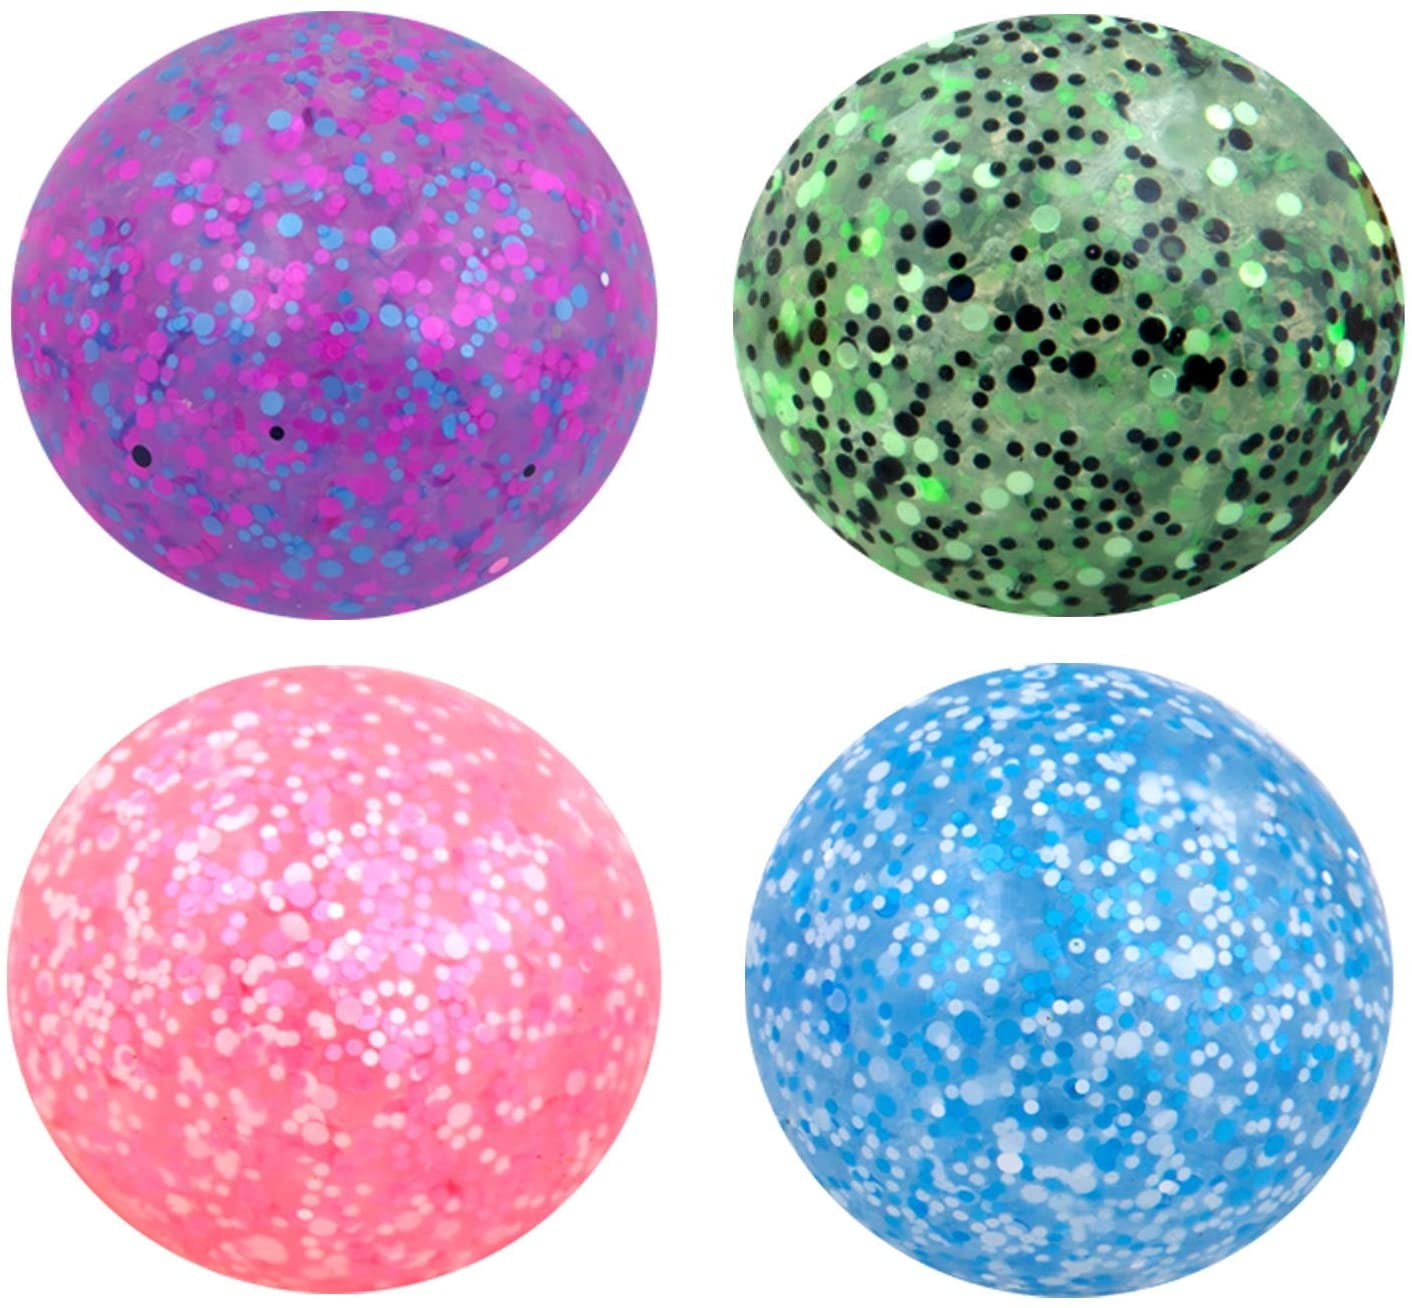 3 Stress Balls Squeezy Stress Balls for Kids and Adults Stress Relief Ball